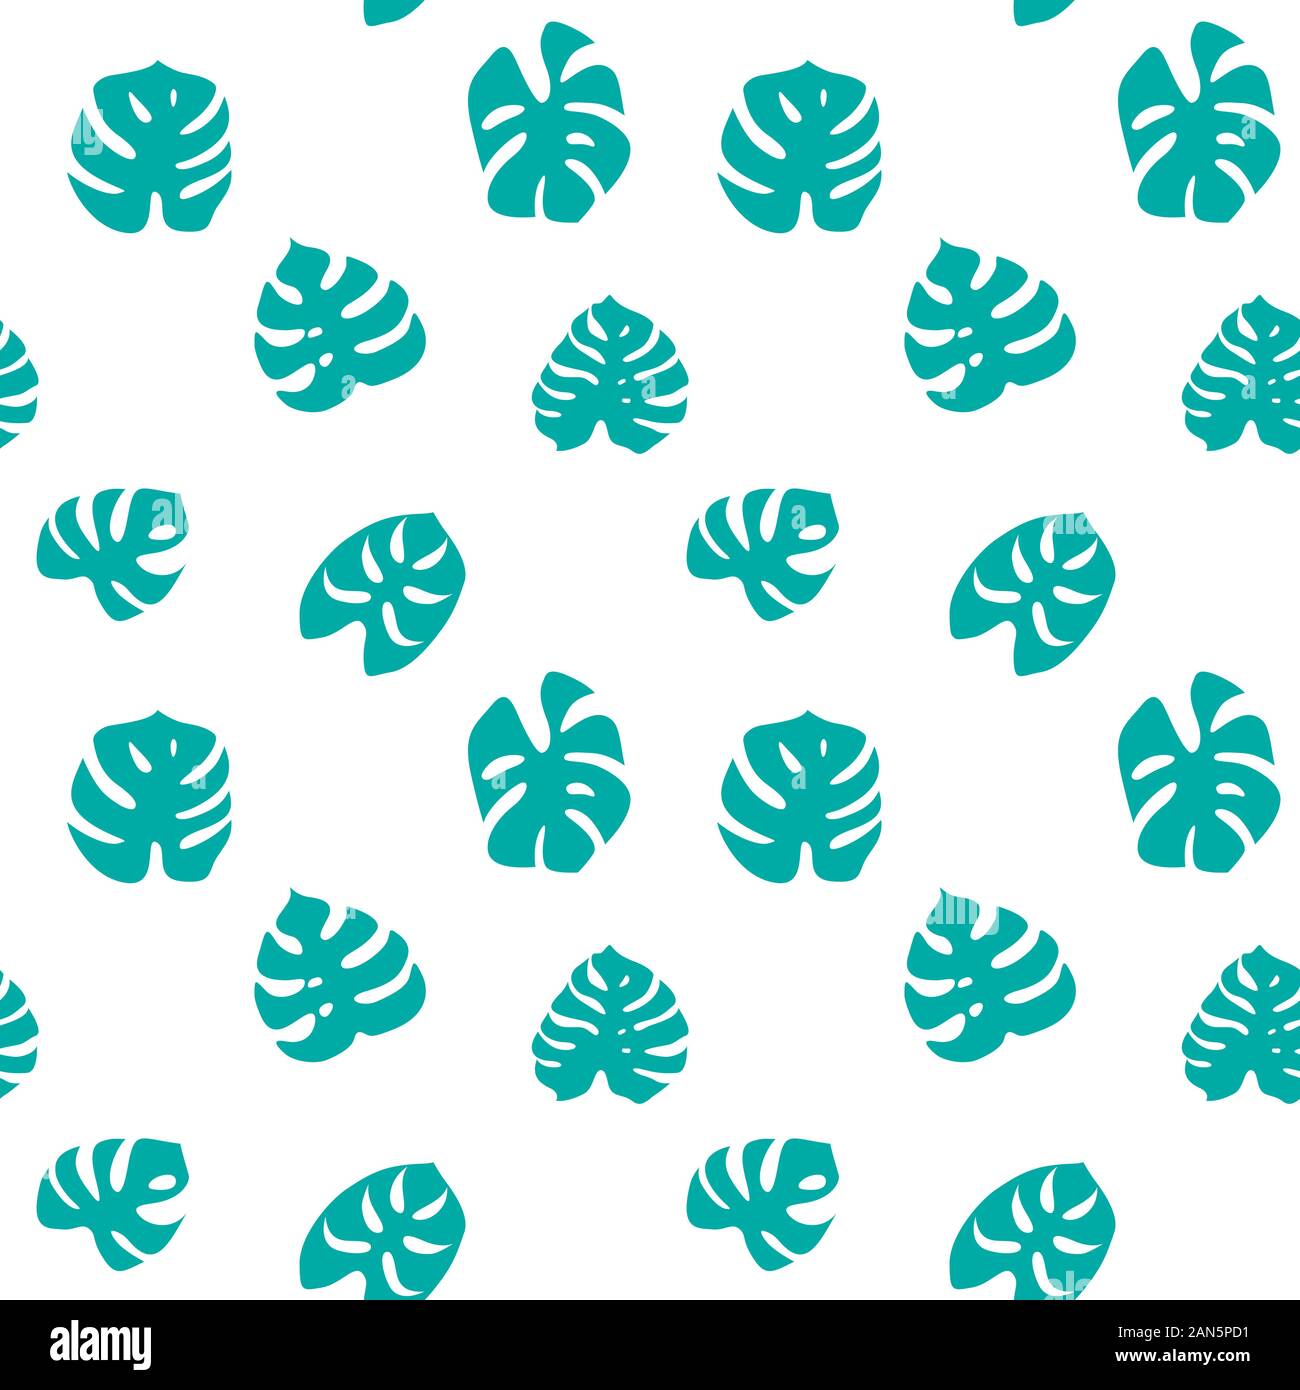 Seamless pattern with green monstera leaves. Exotic plant silhouettes on white background. Flat vector illustration. Stock Vector